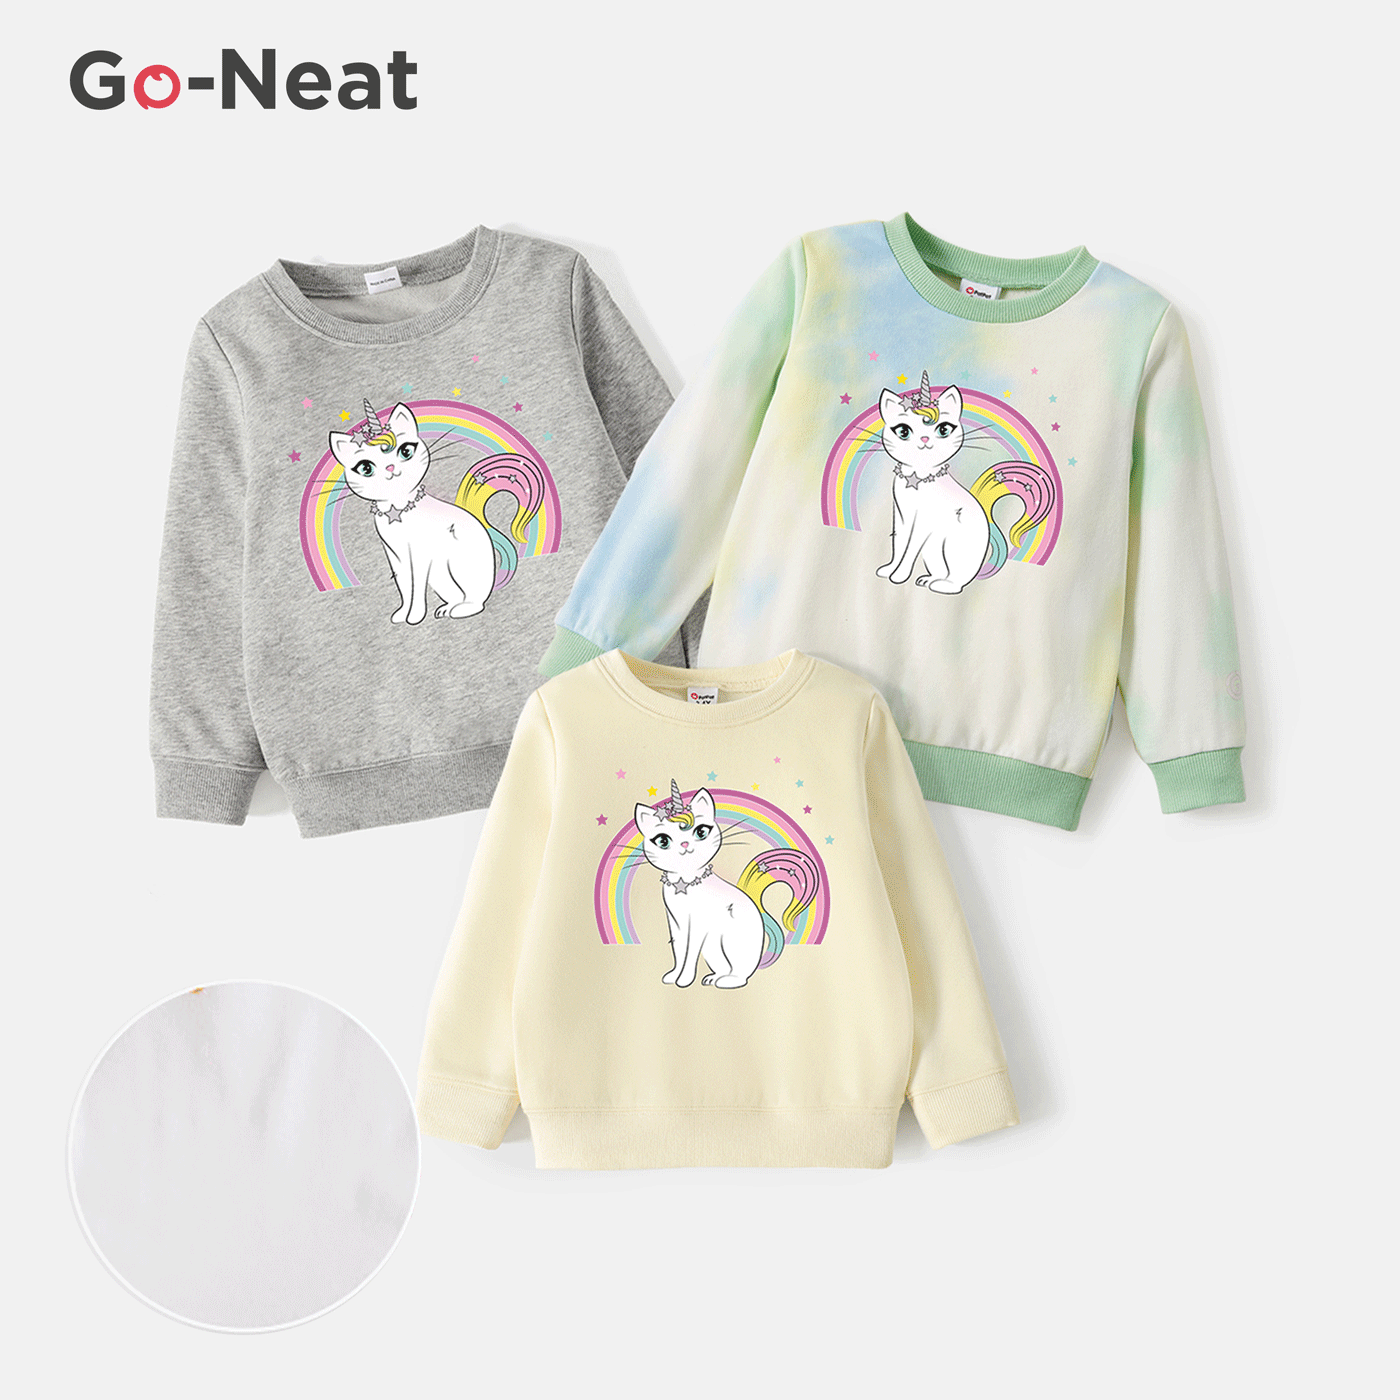 Go-Neat Water Repellent and Stain Resistant Sibling Matching Rainbow & Cat Print Long-sleeve Sweatshirts